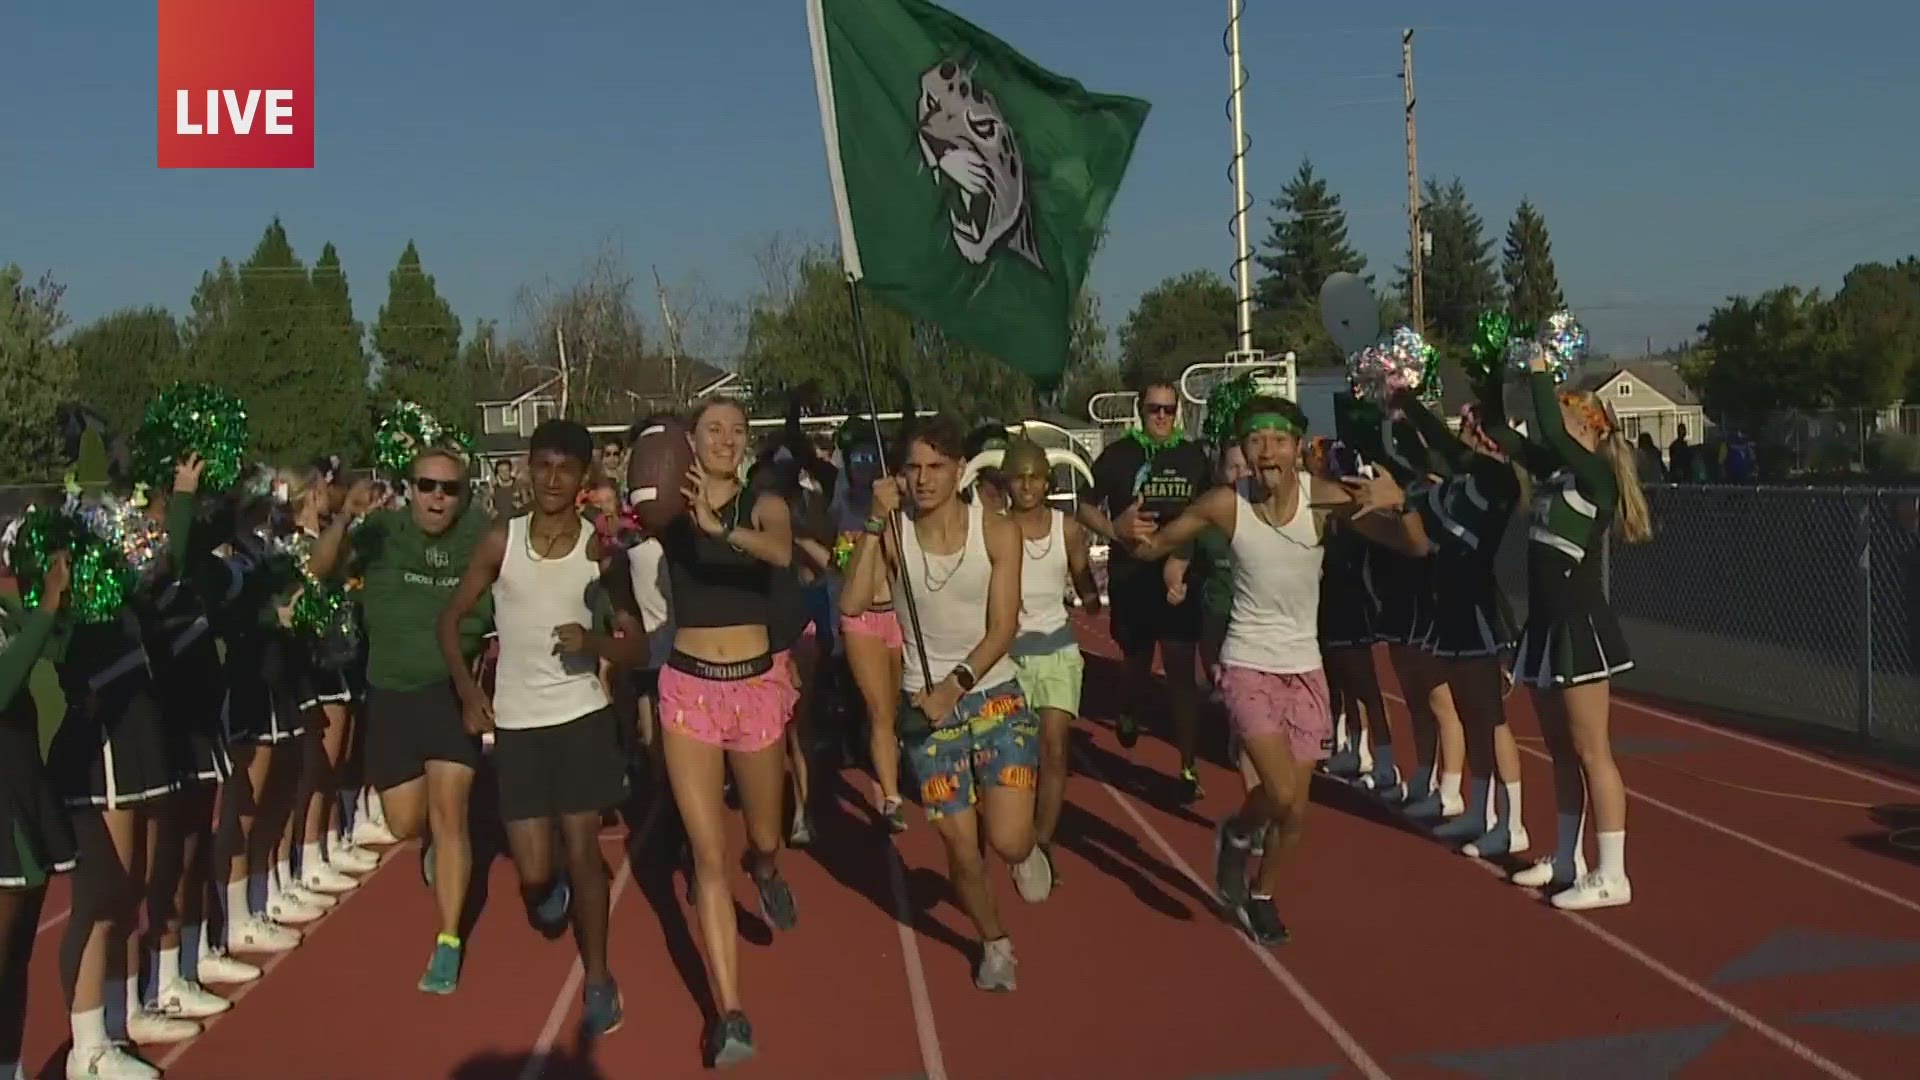 Emerald Ridge hasn't beat Puyallup since 2016. KING 5's Chris Egan speaks with Emerald Ridge's head coach, cross country team ahead of the Sept. 1 game.